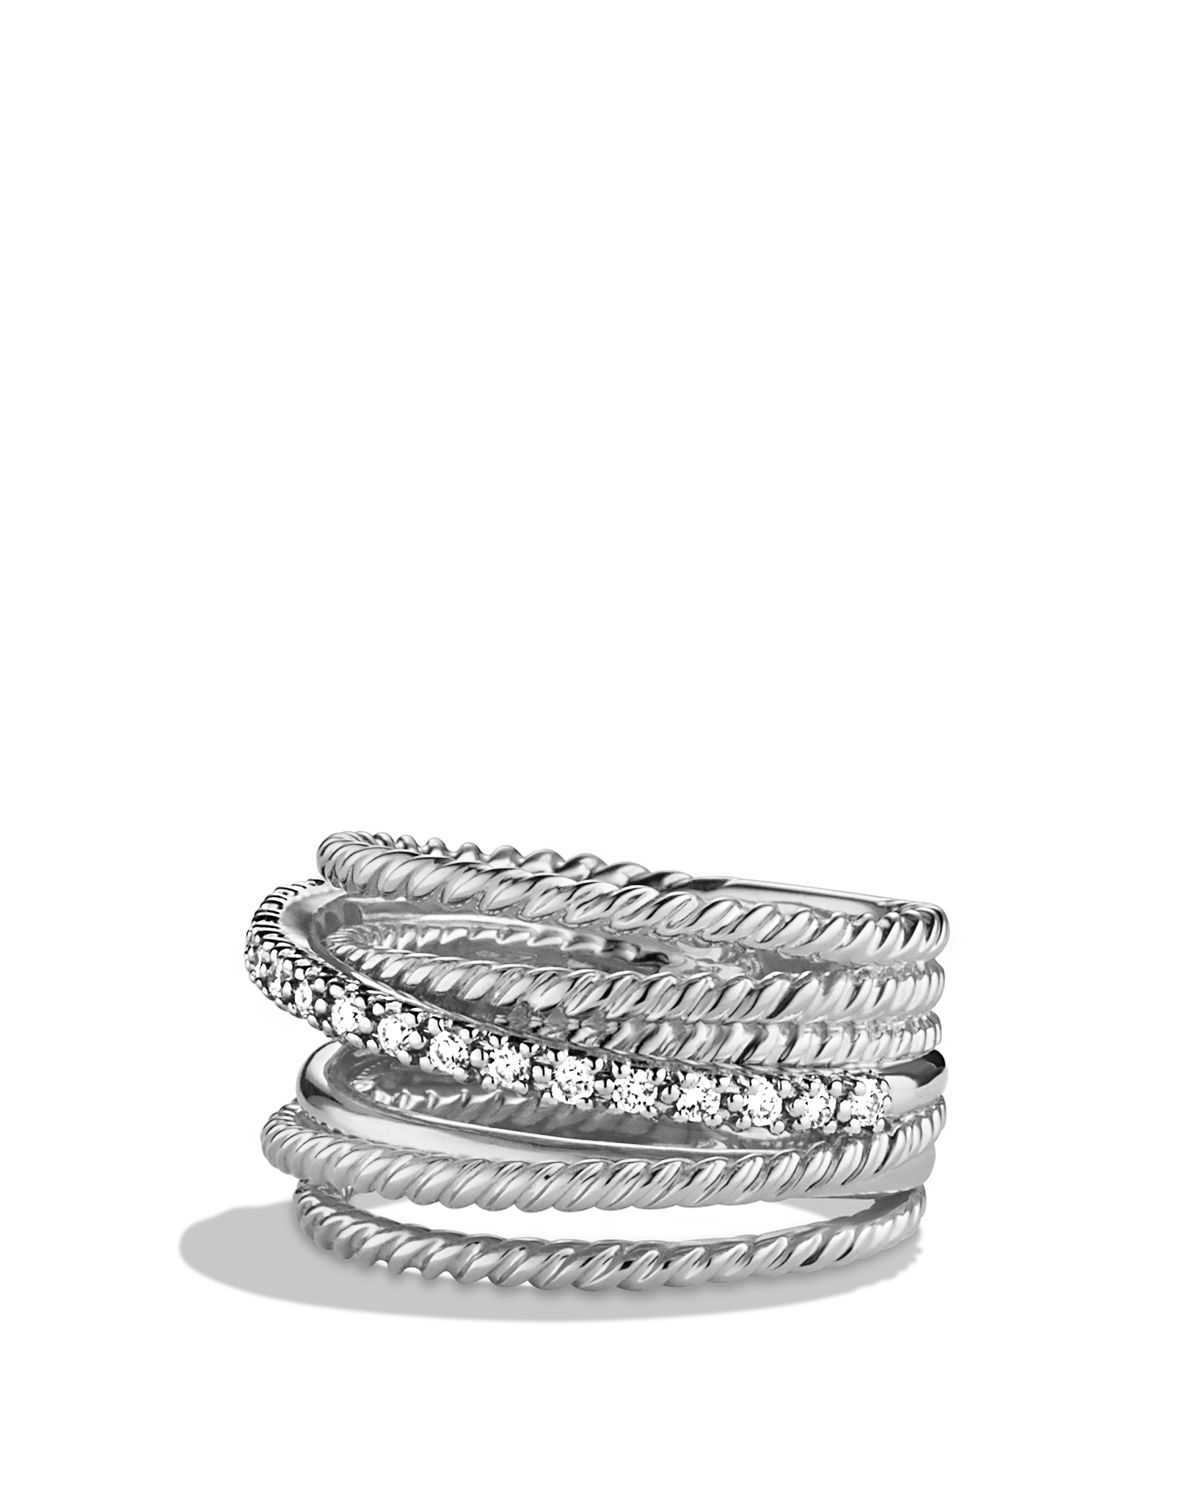 David Yurman Silver Crossover Wide Ring With Diamonds Product 1 16936844 2 893229691 Normal 